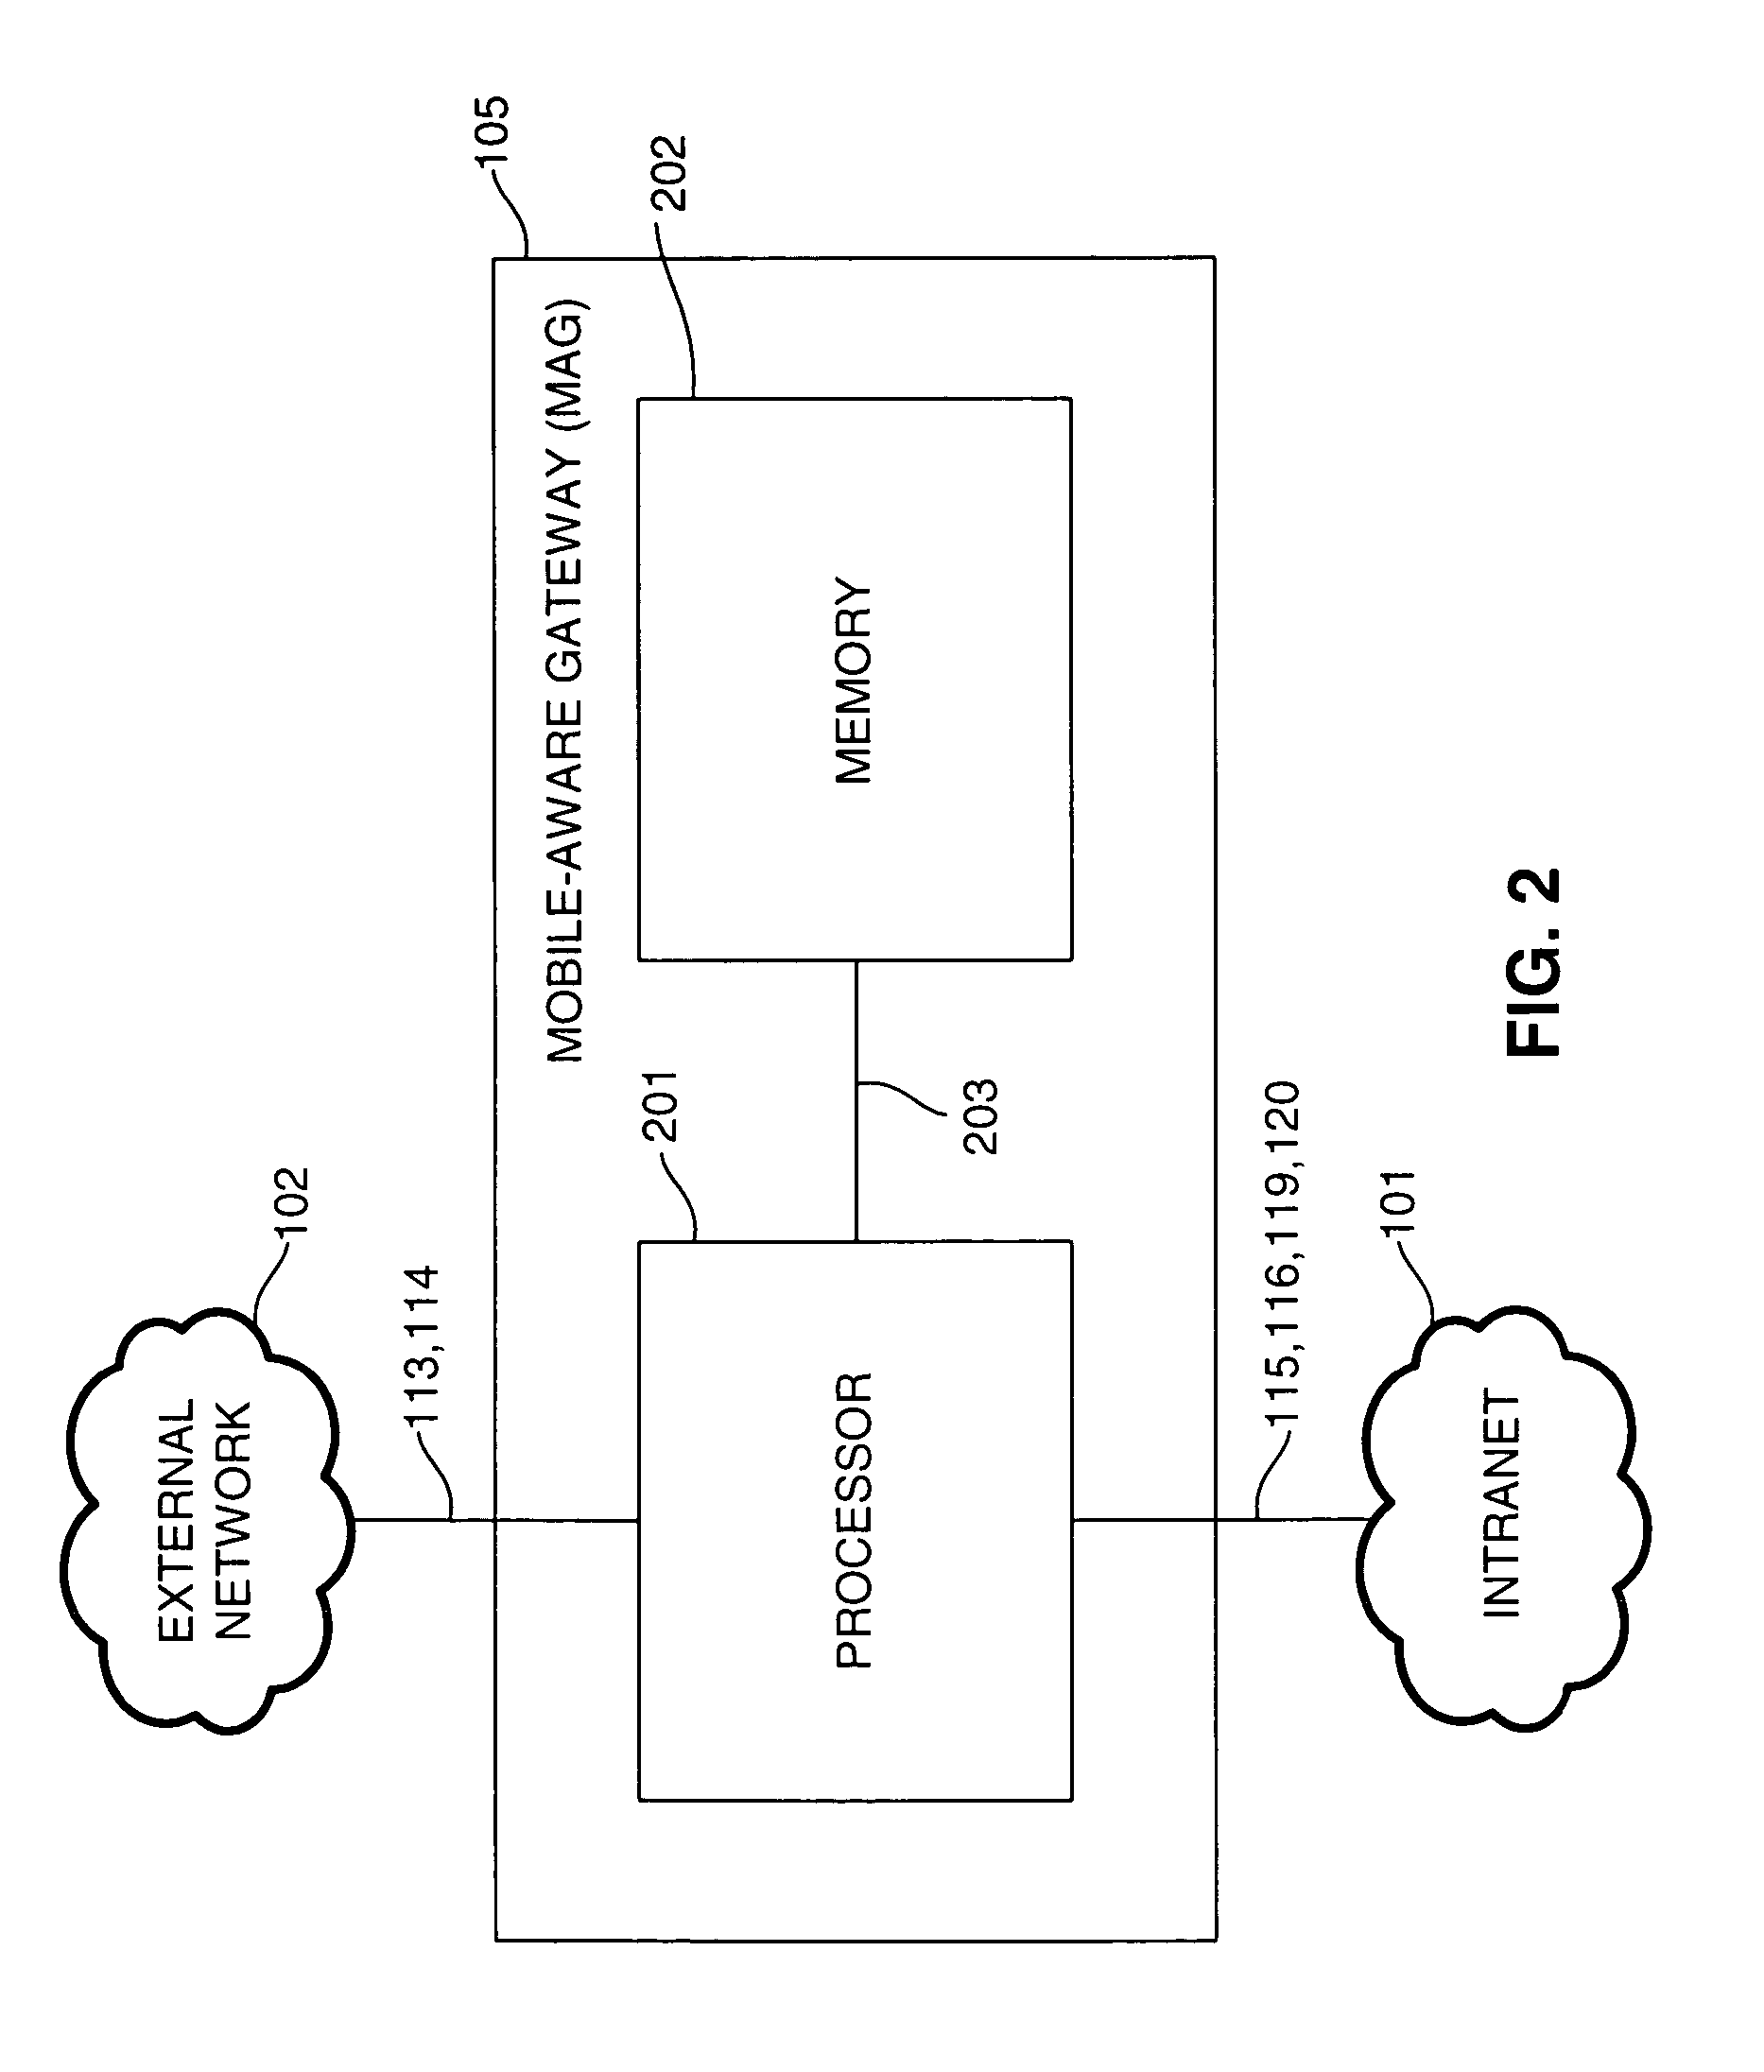 Method and apparatus for providing low-latency secure session continuity between mobile nodes